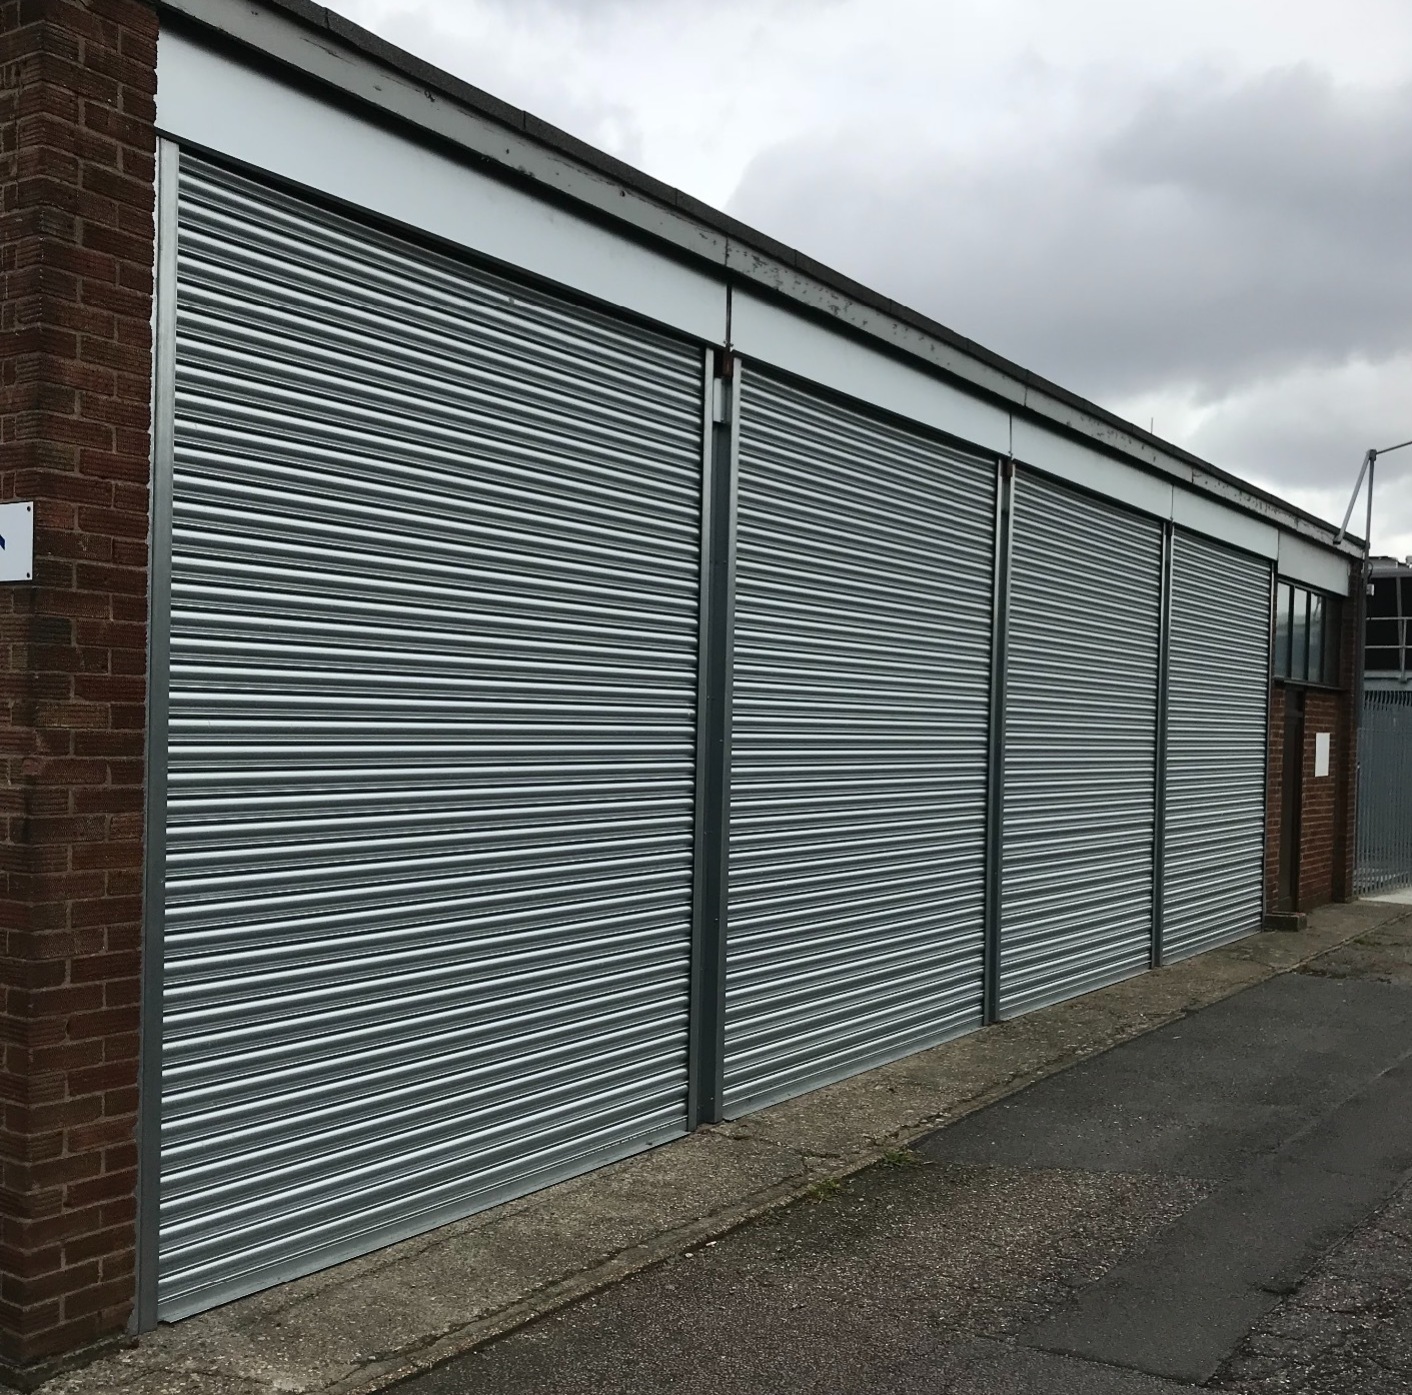 Industrial Roller shutter door installed on small building within an outdoor work area with outdoor work area